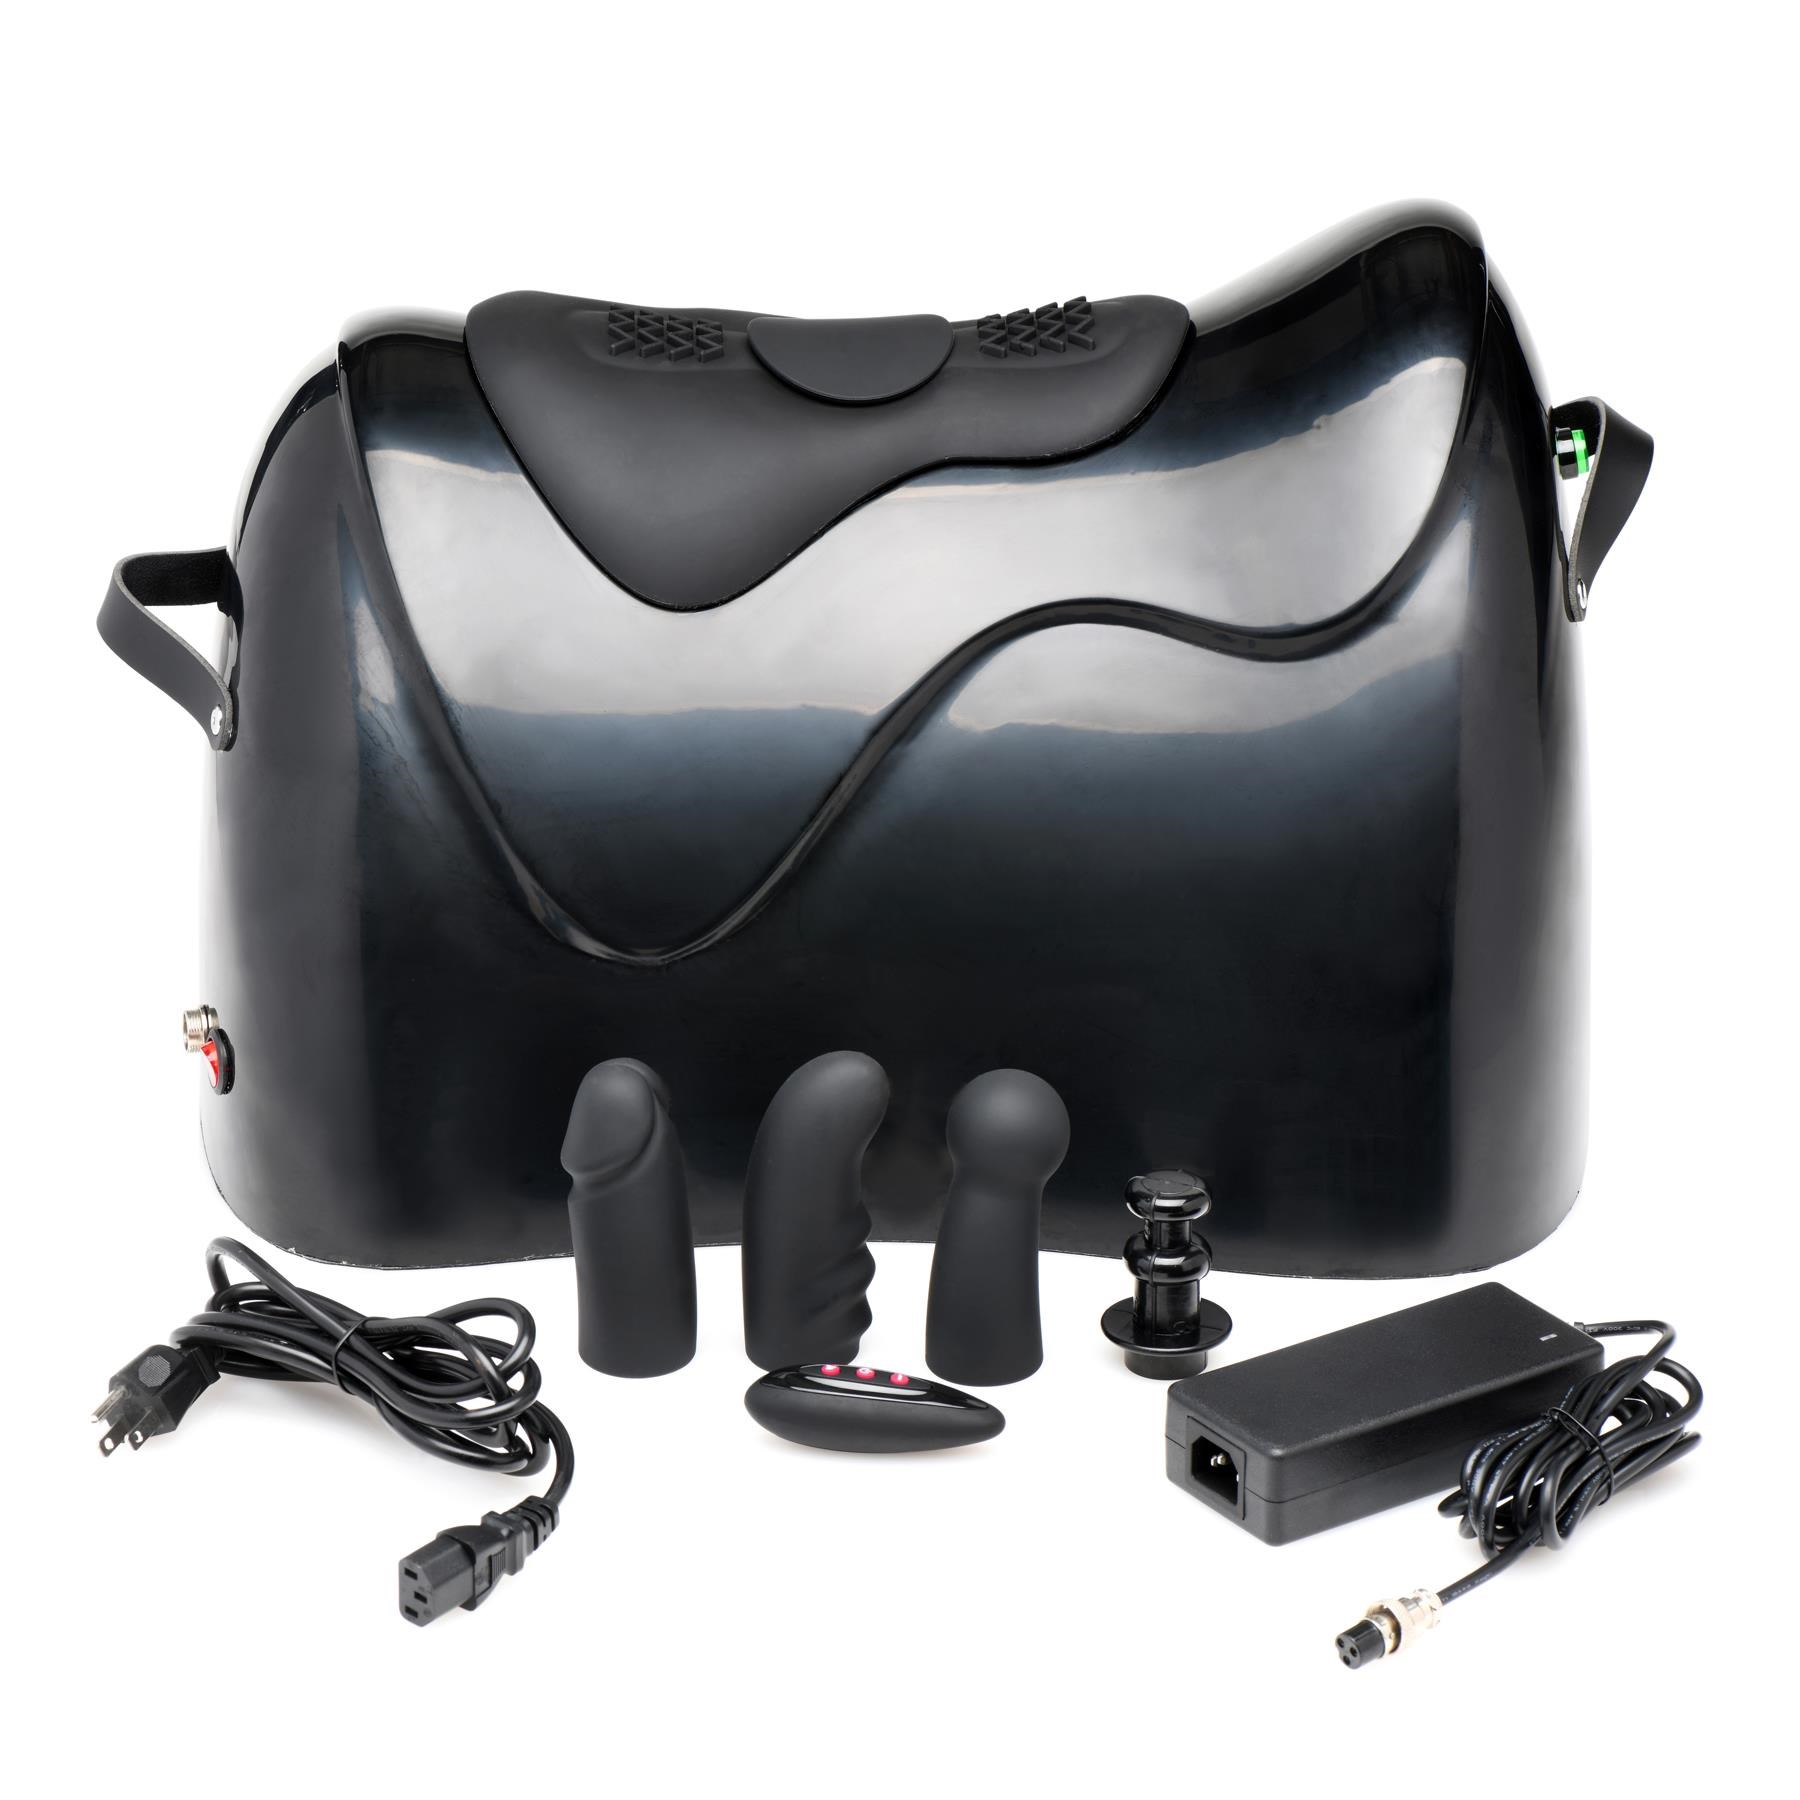 The Bucking Saddle Thrusting and Vibrating Sex Machine - Product Shot With All Components #1